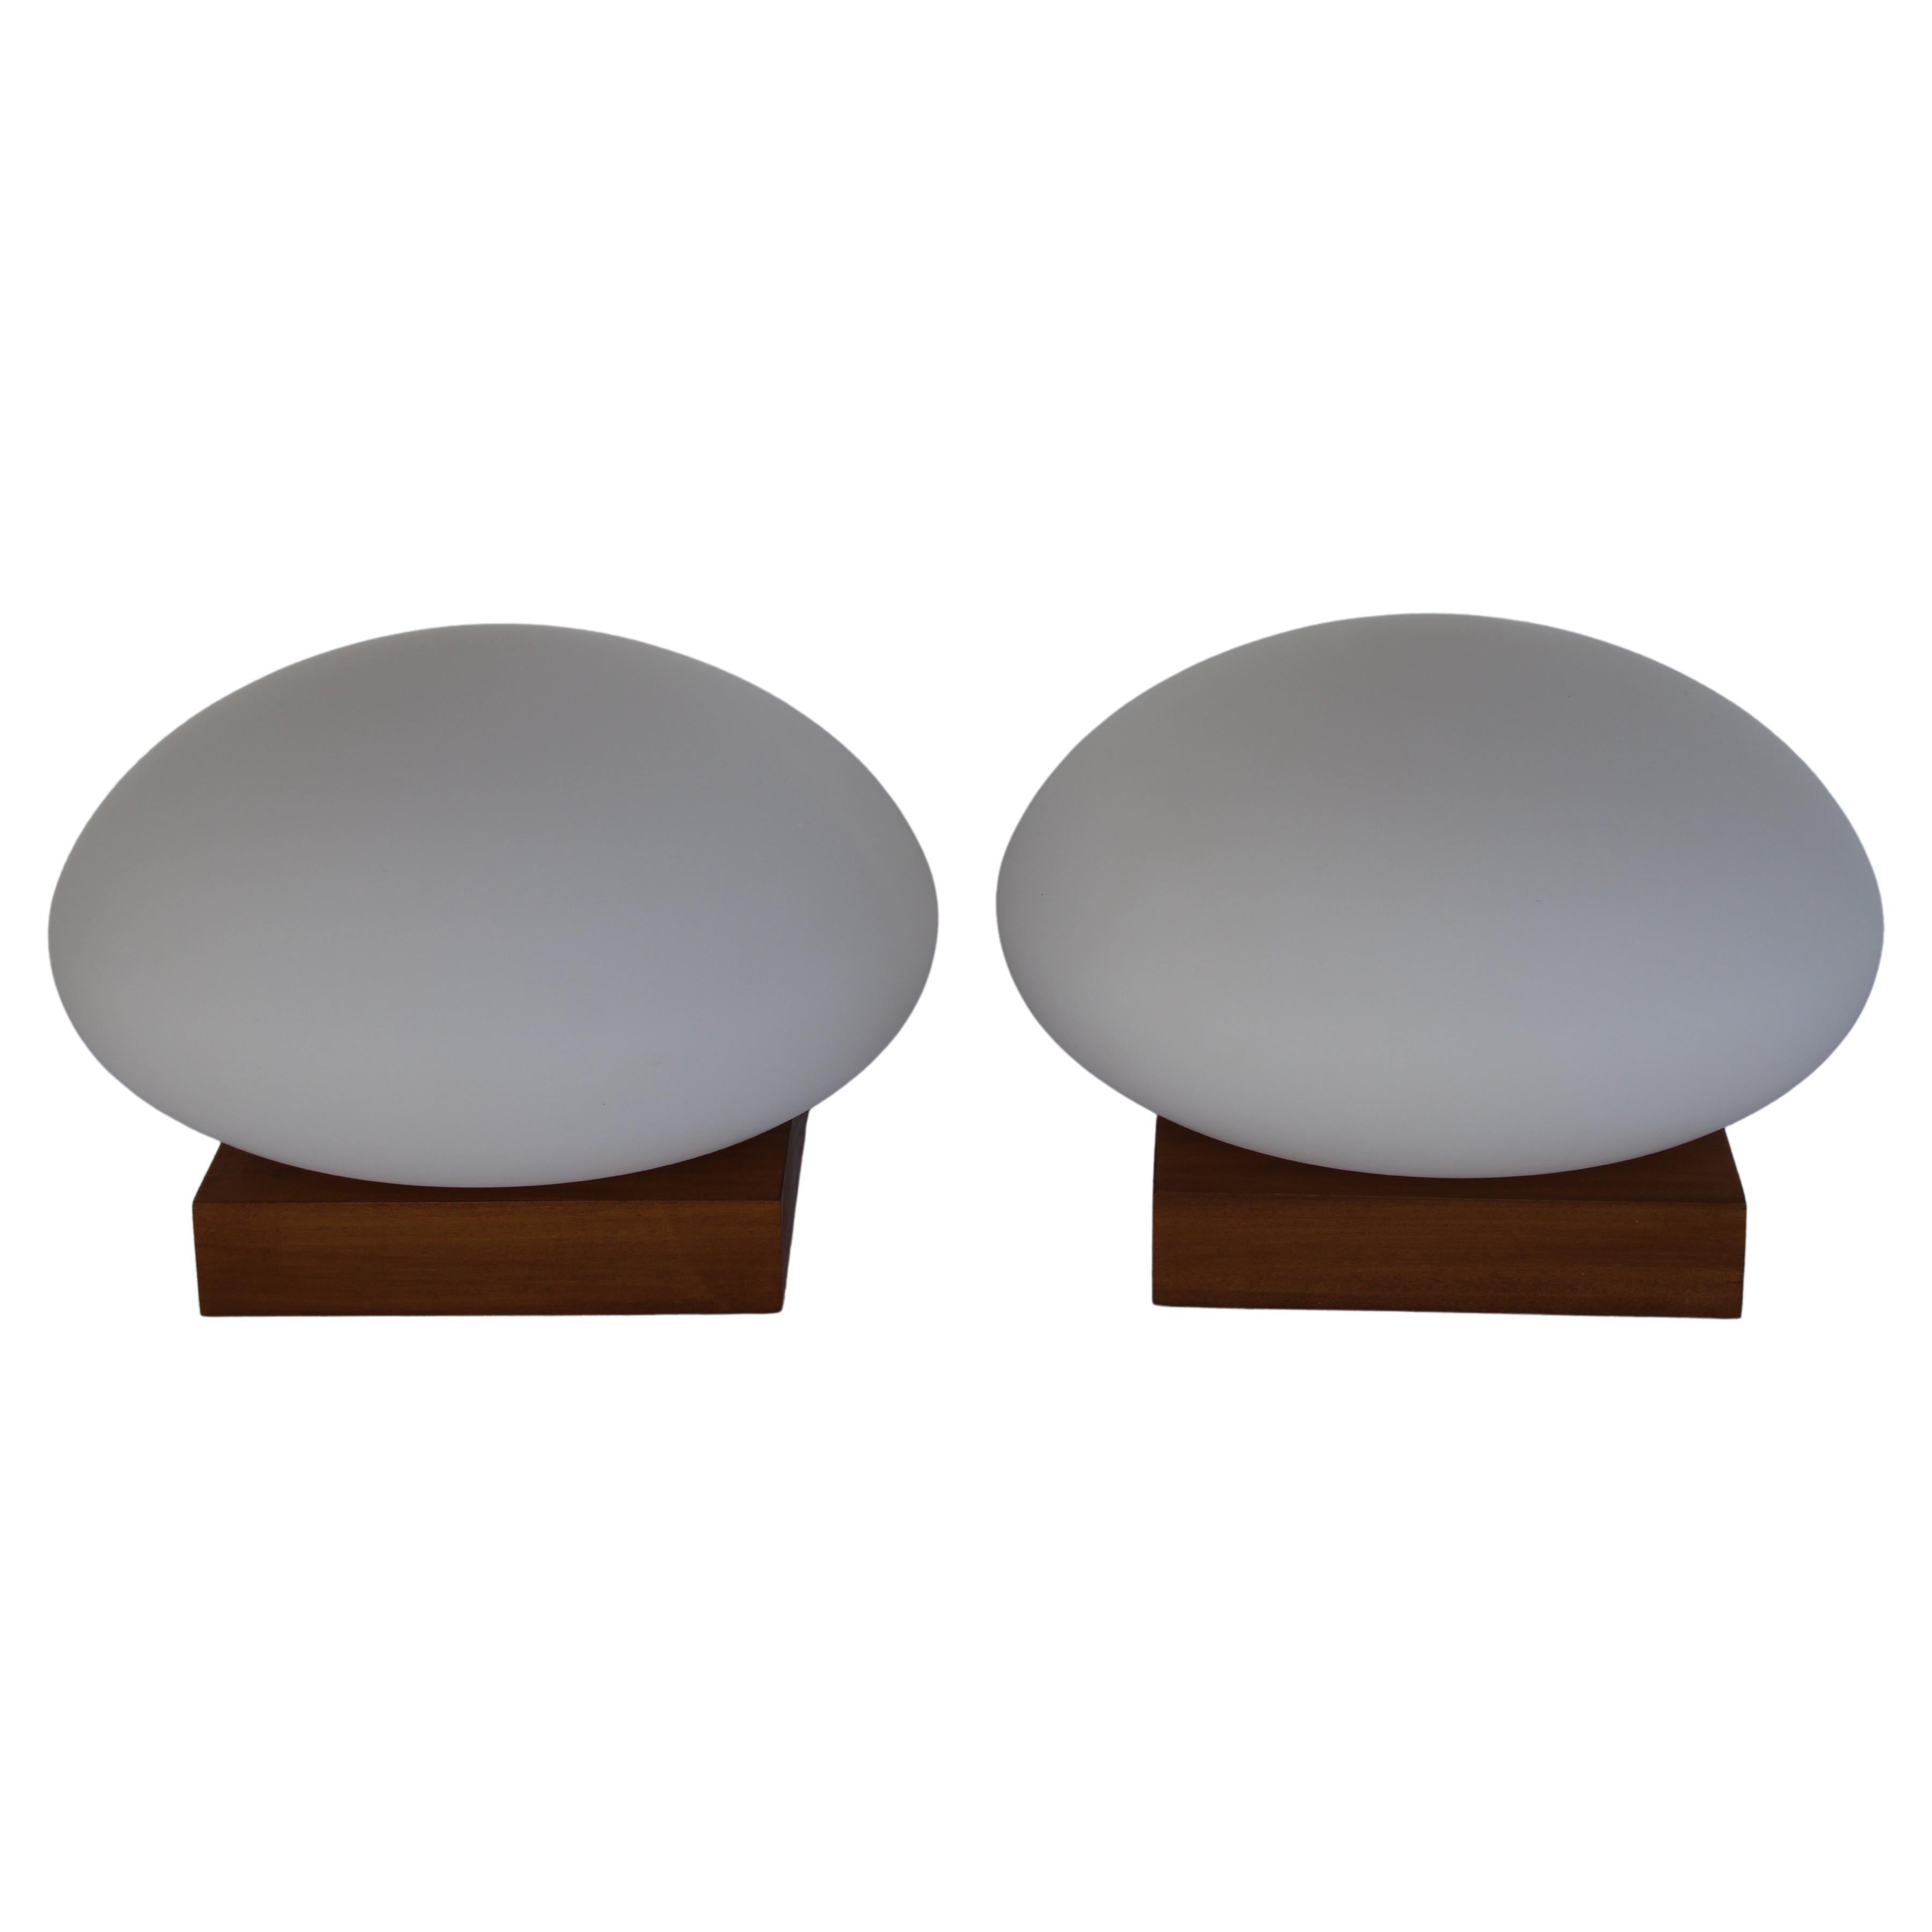 Pair of Mushroom Table Lamps in the style of Laurel Lamps